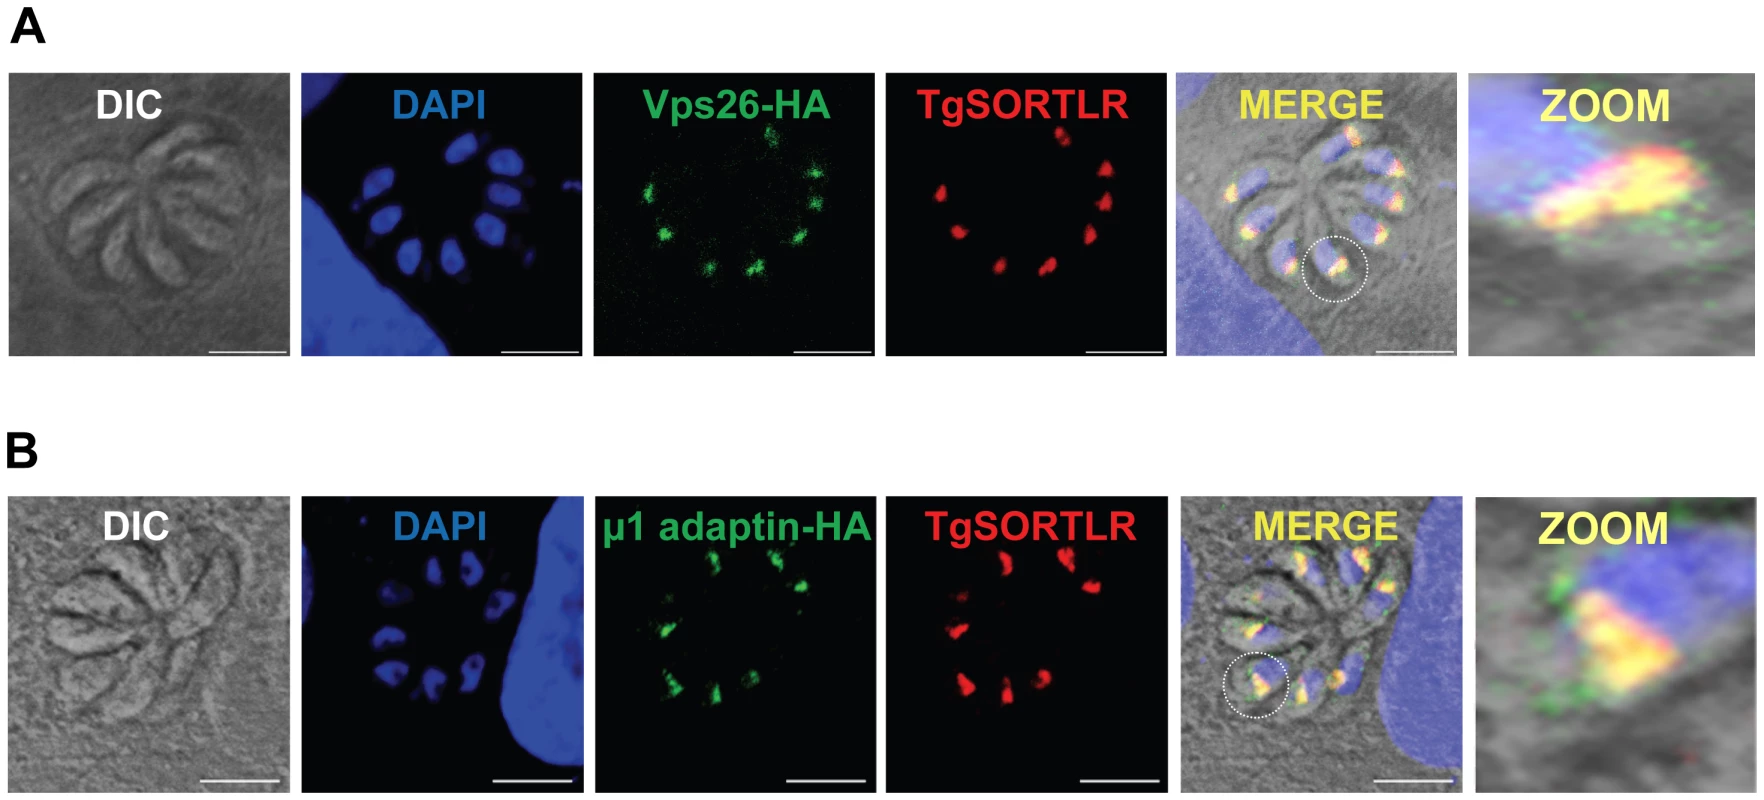 TgSORTLR co-localizes with TgVsp26 and Tgμ1-adpatin.